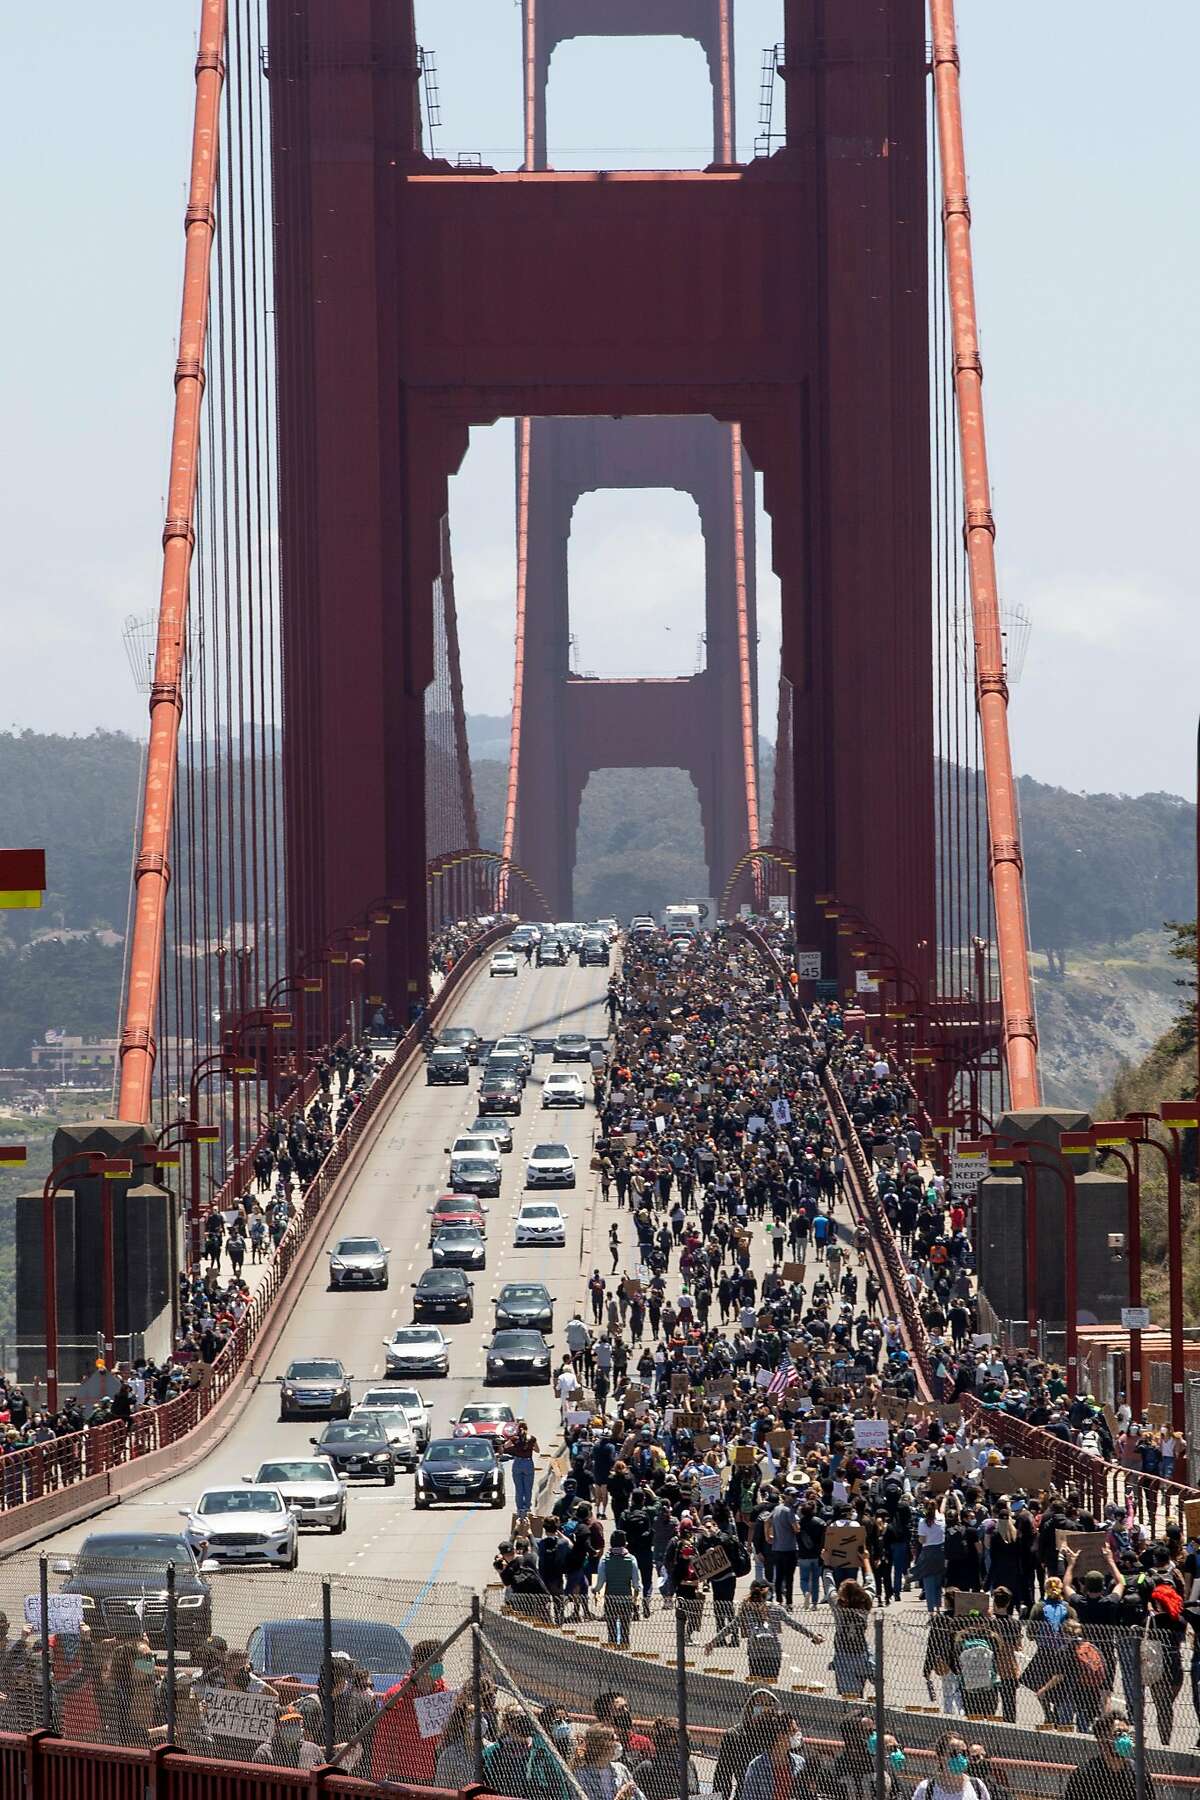 Thousands of demonstrators make their way across the Golden Gate Bridge in San Francisco, Calif. Saturday, June 6, 2020 during a march in support of the Black Lives Matter movement.